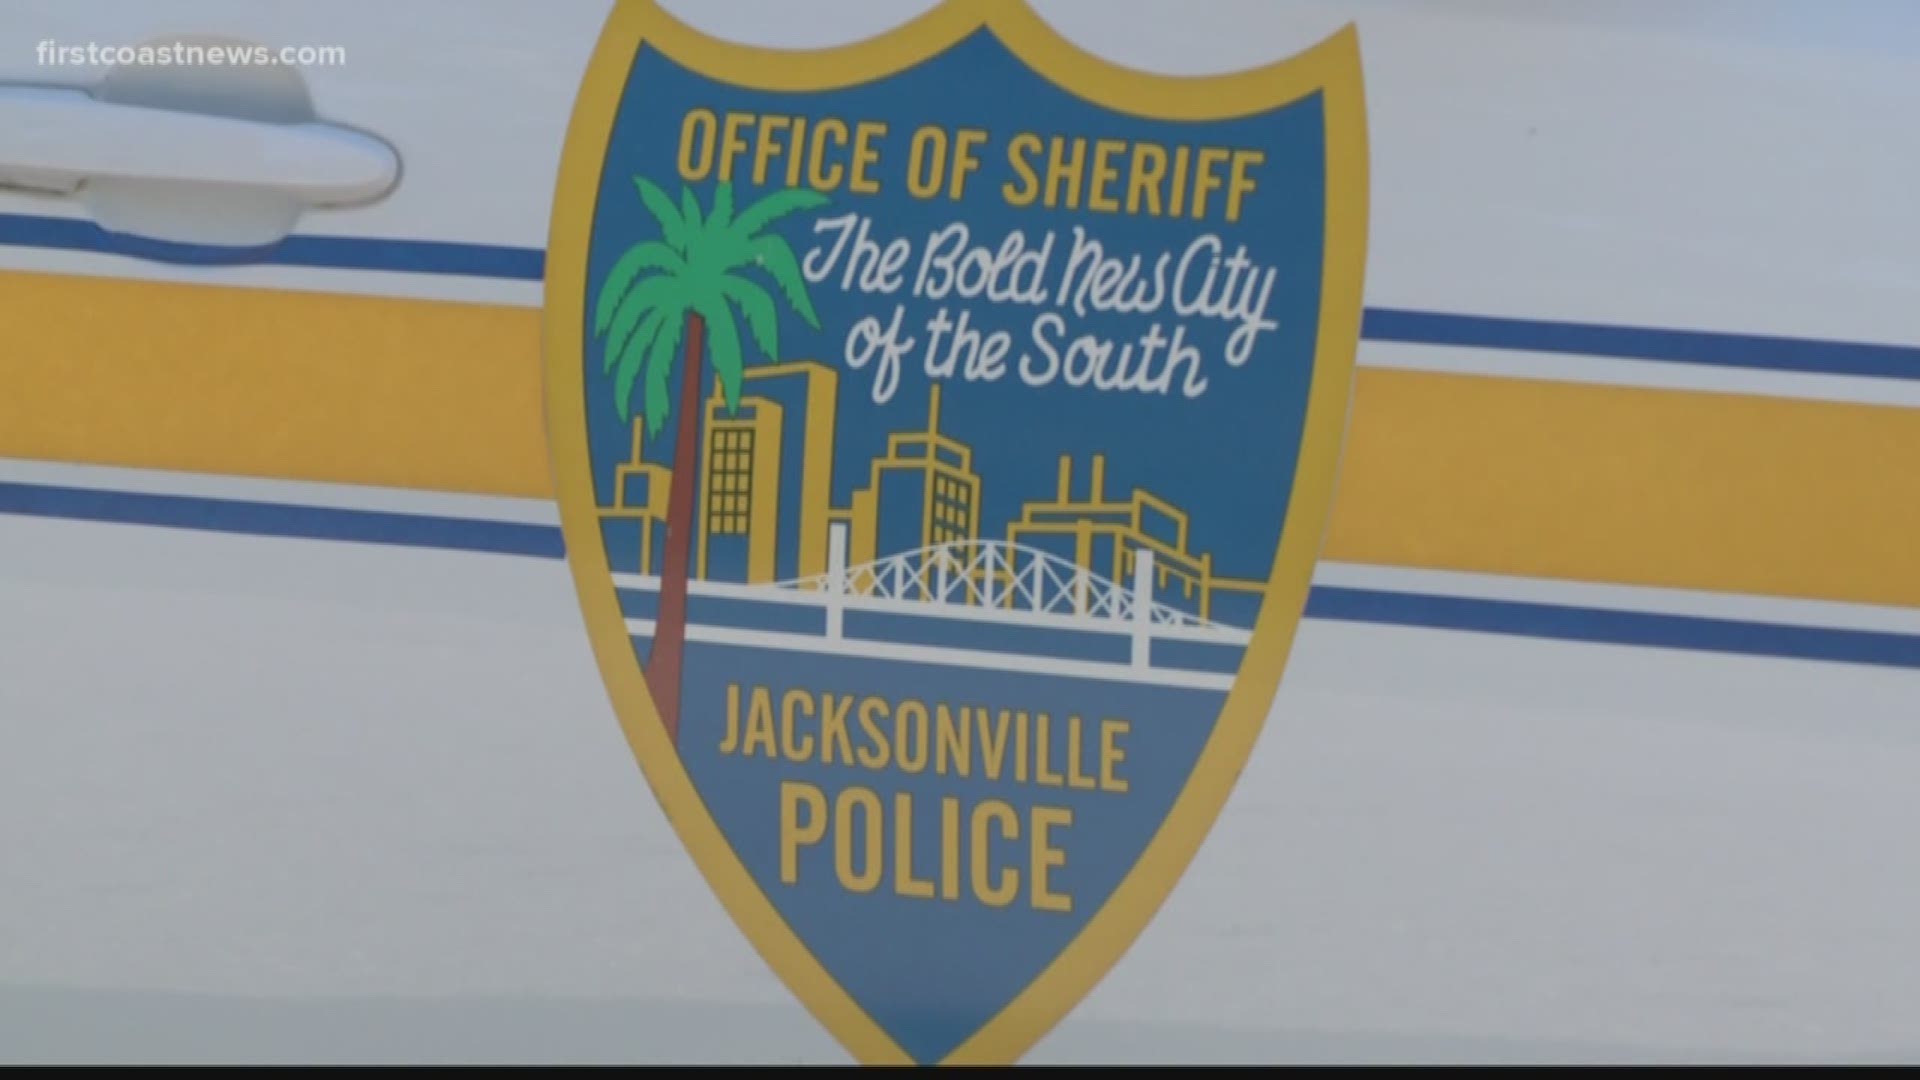 A man was shot in the head Sunday morning. The shooting happened during an already-violent weekend across Jacksonville.